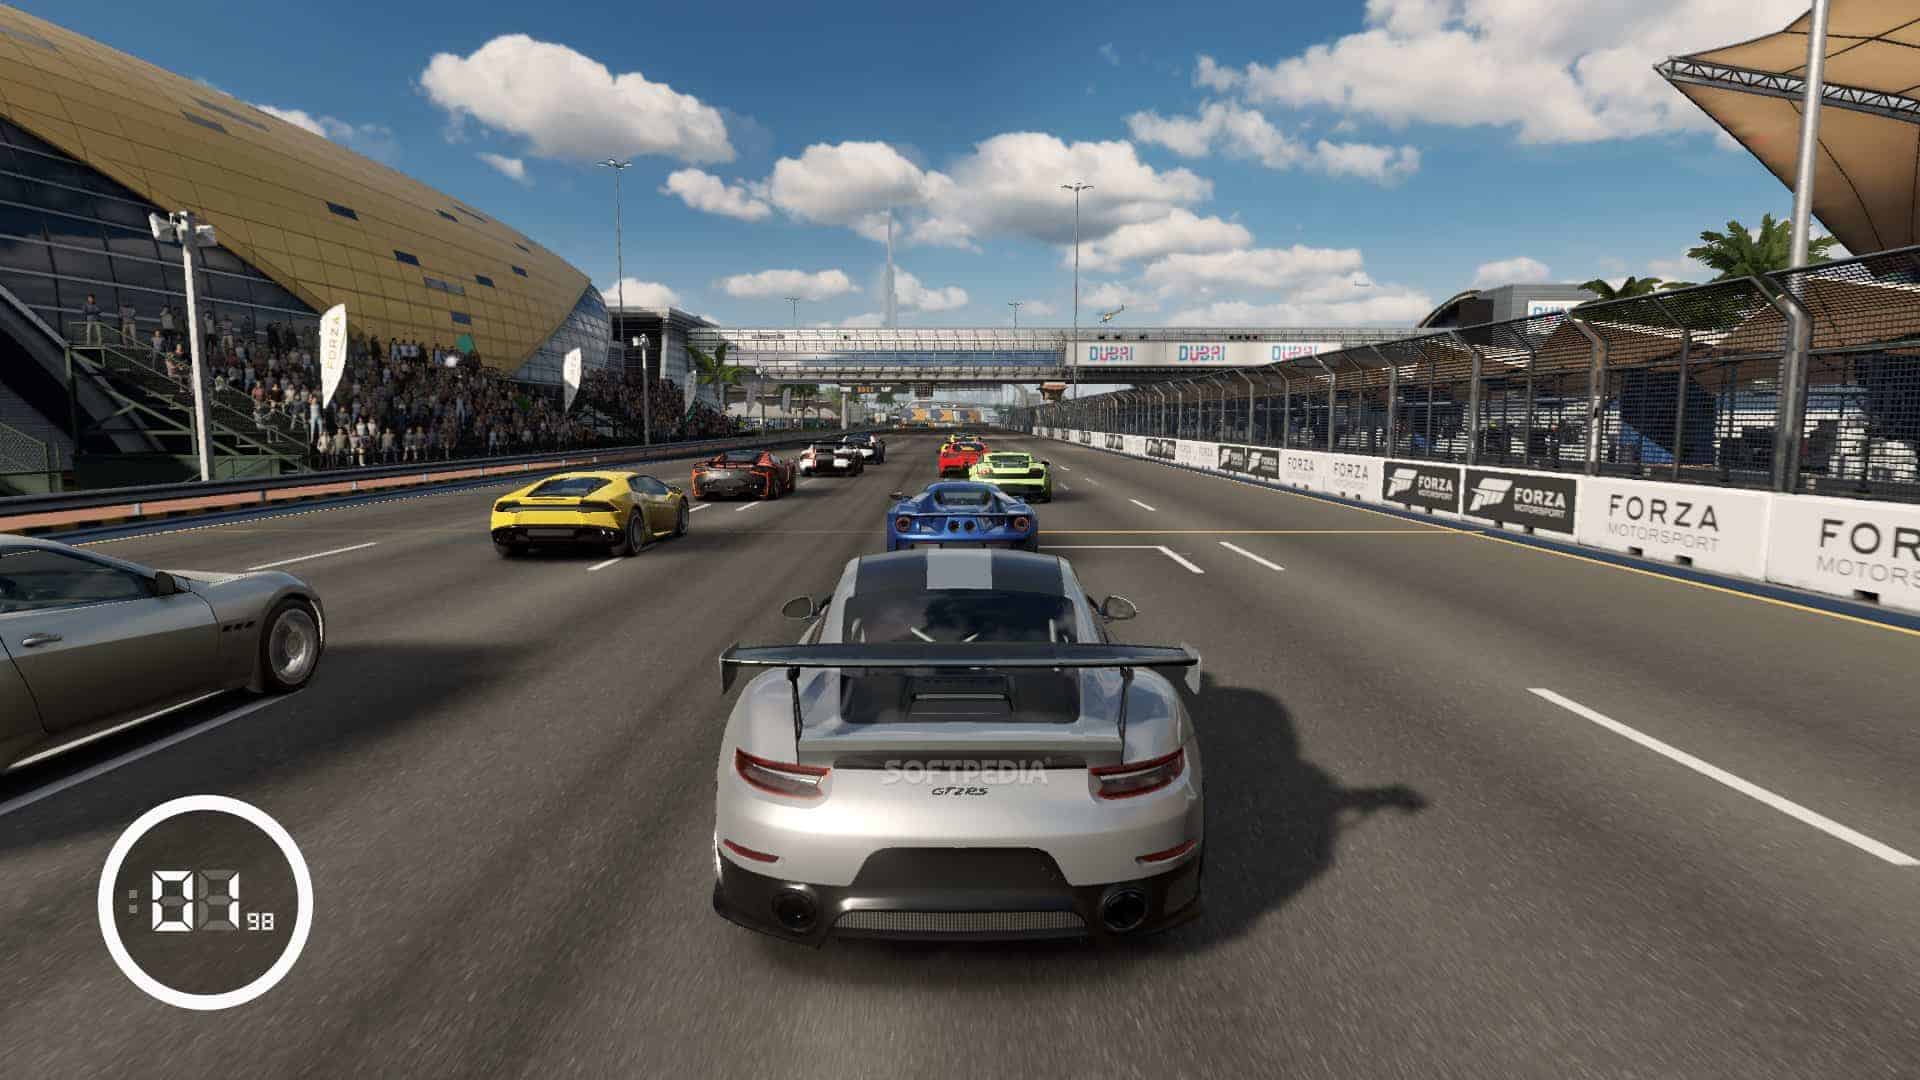 forza 7 download pc